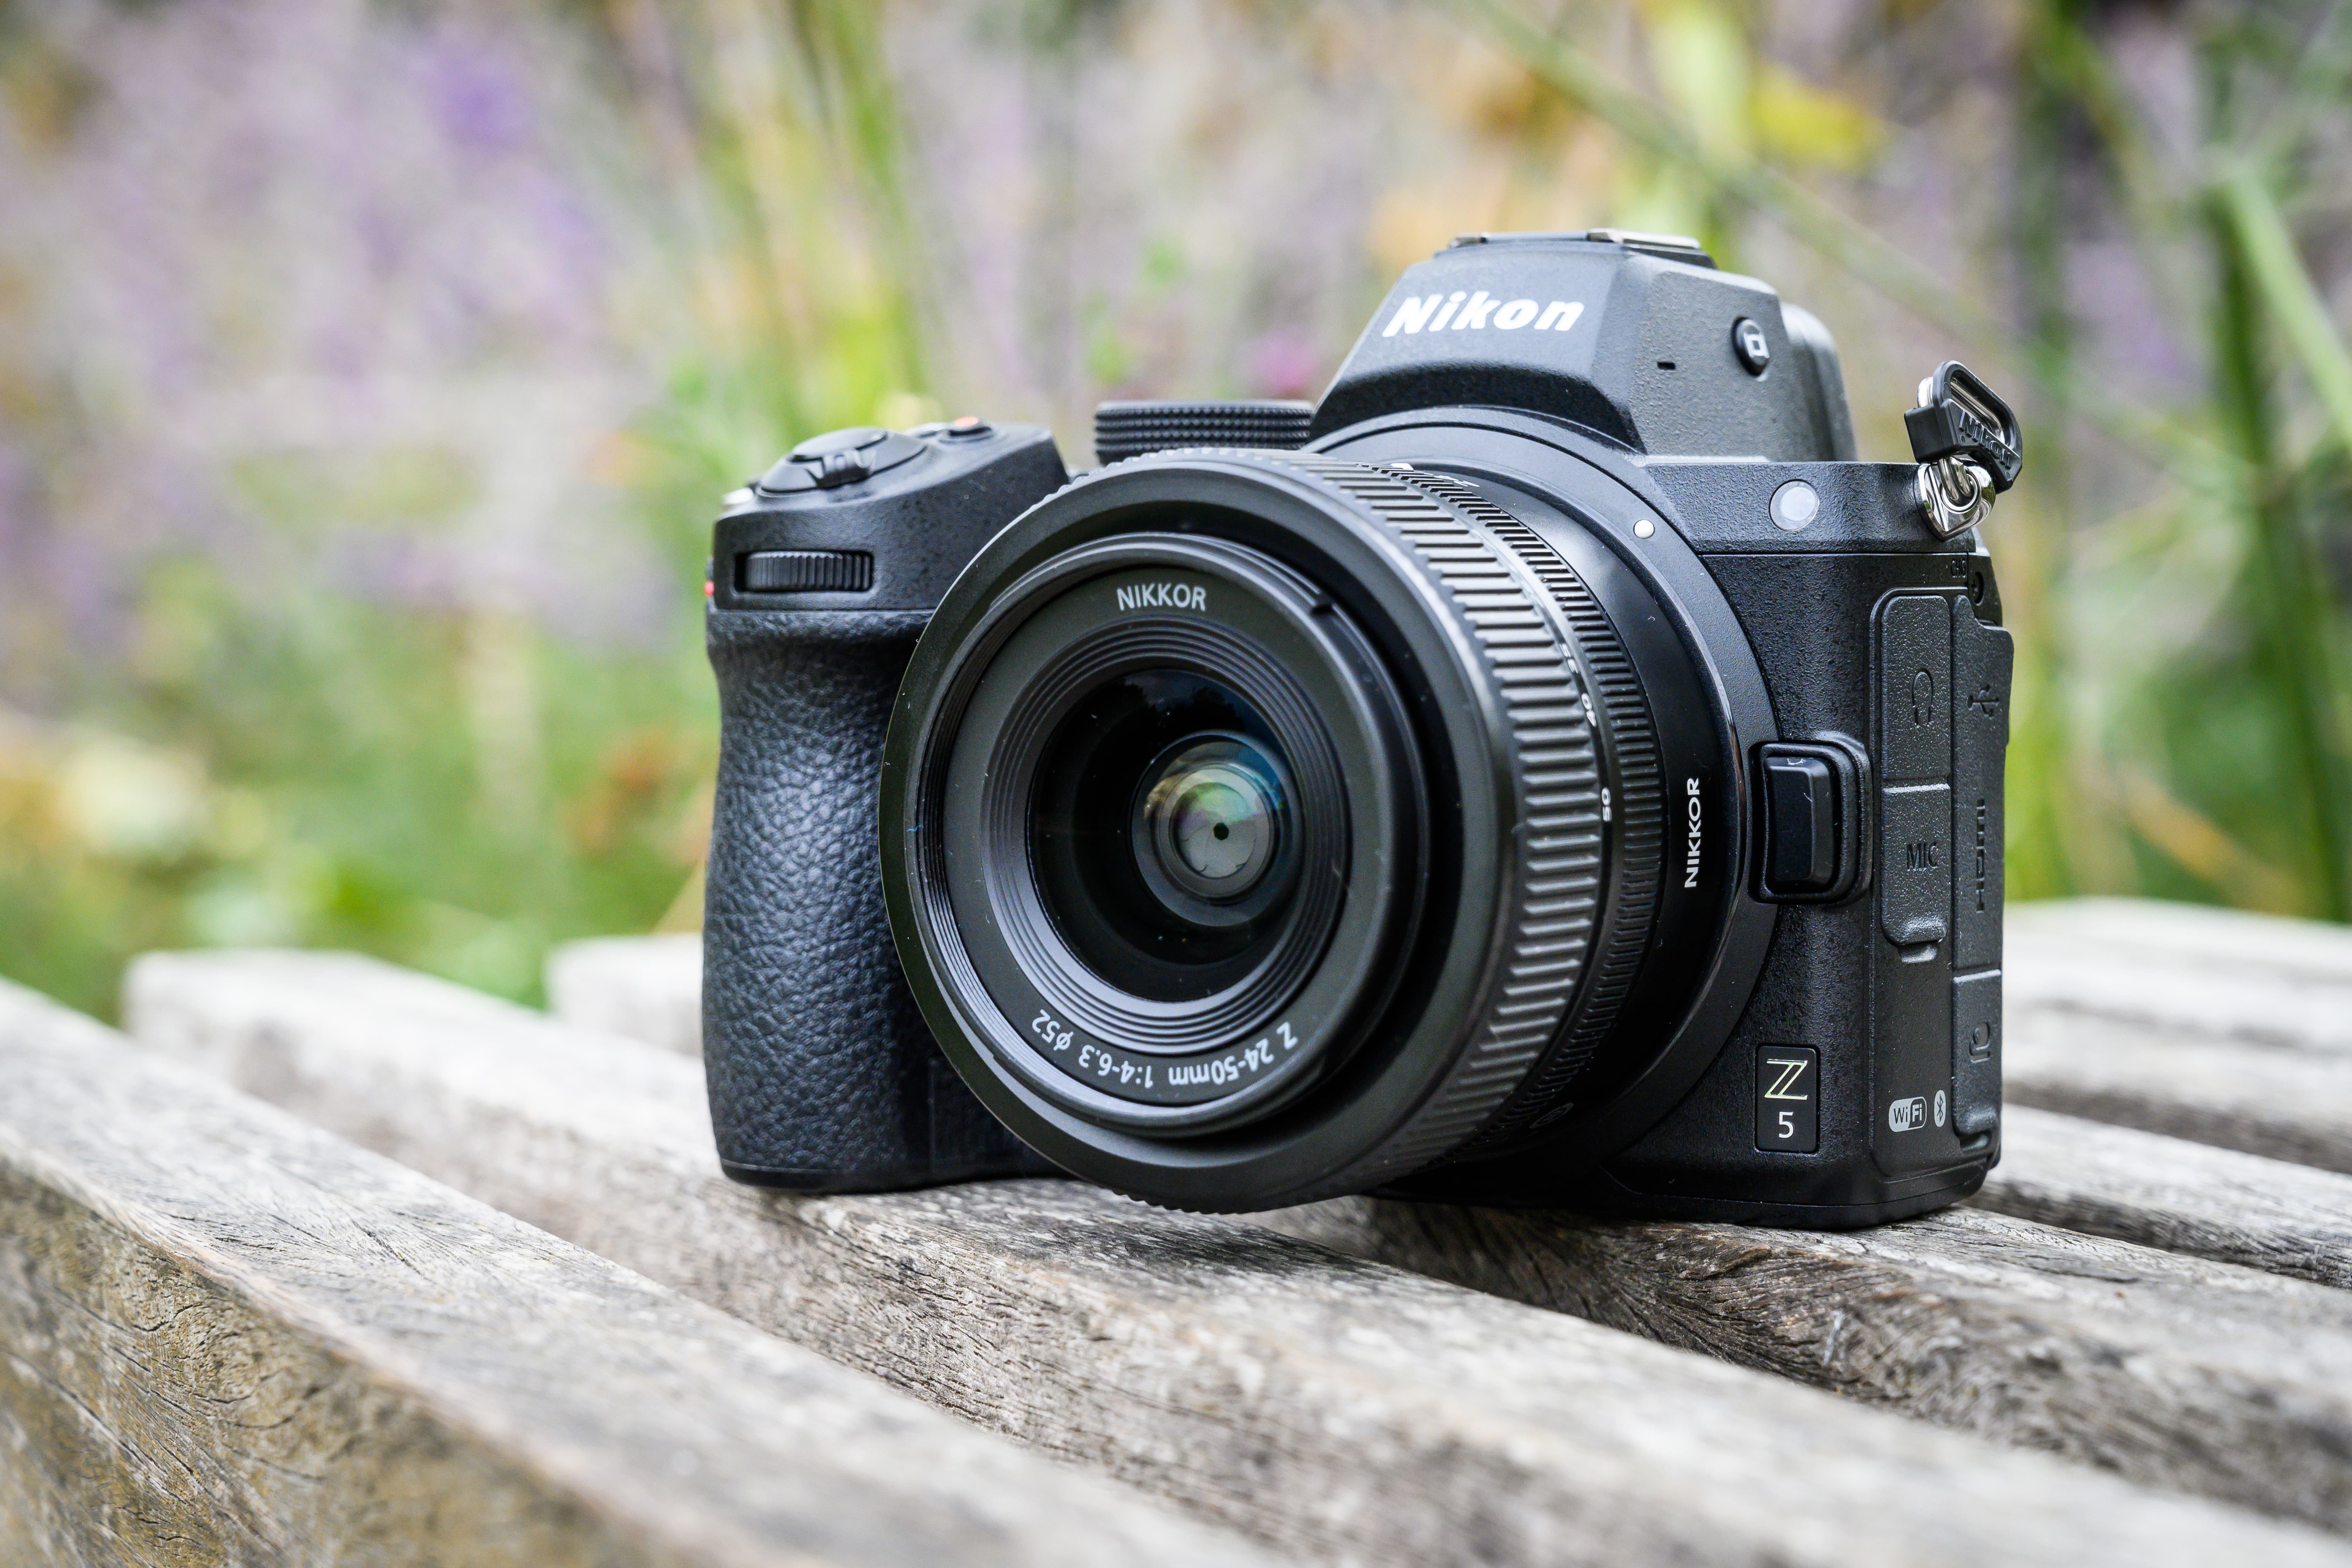 It's not one of the most attractive mirrorless camera designs, however the Z5 brings a lot to the table for first-time full-frame buyers